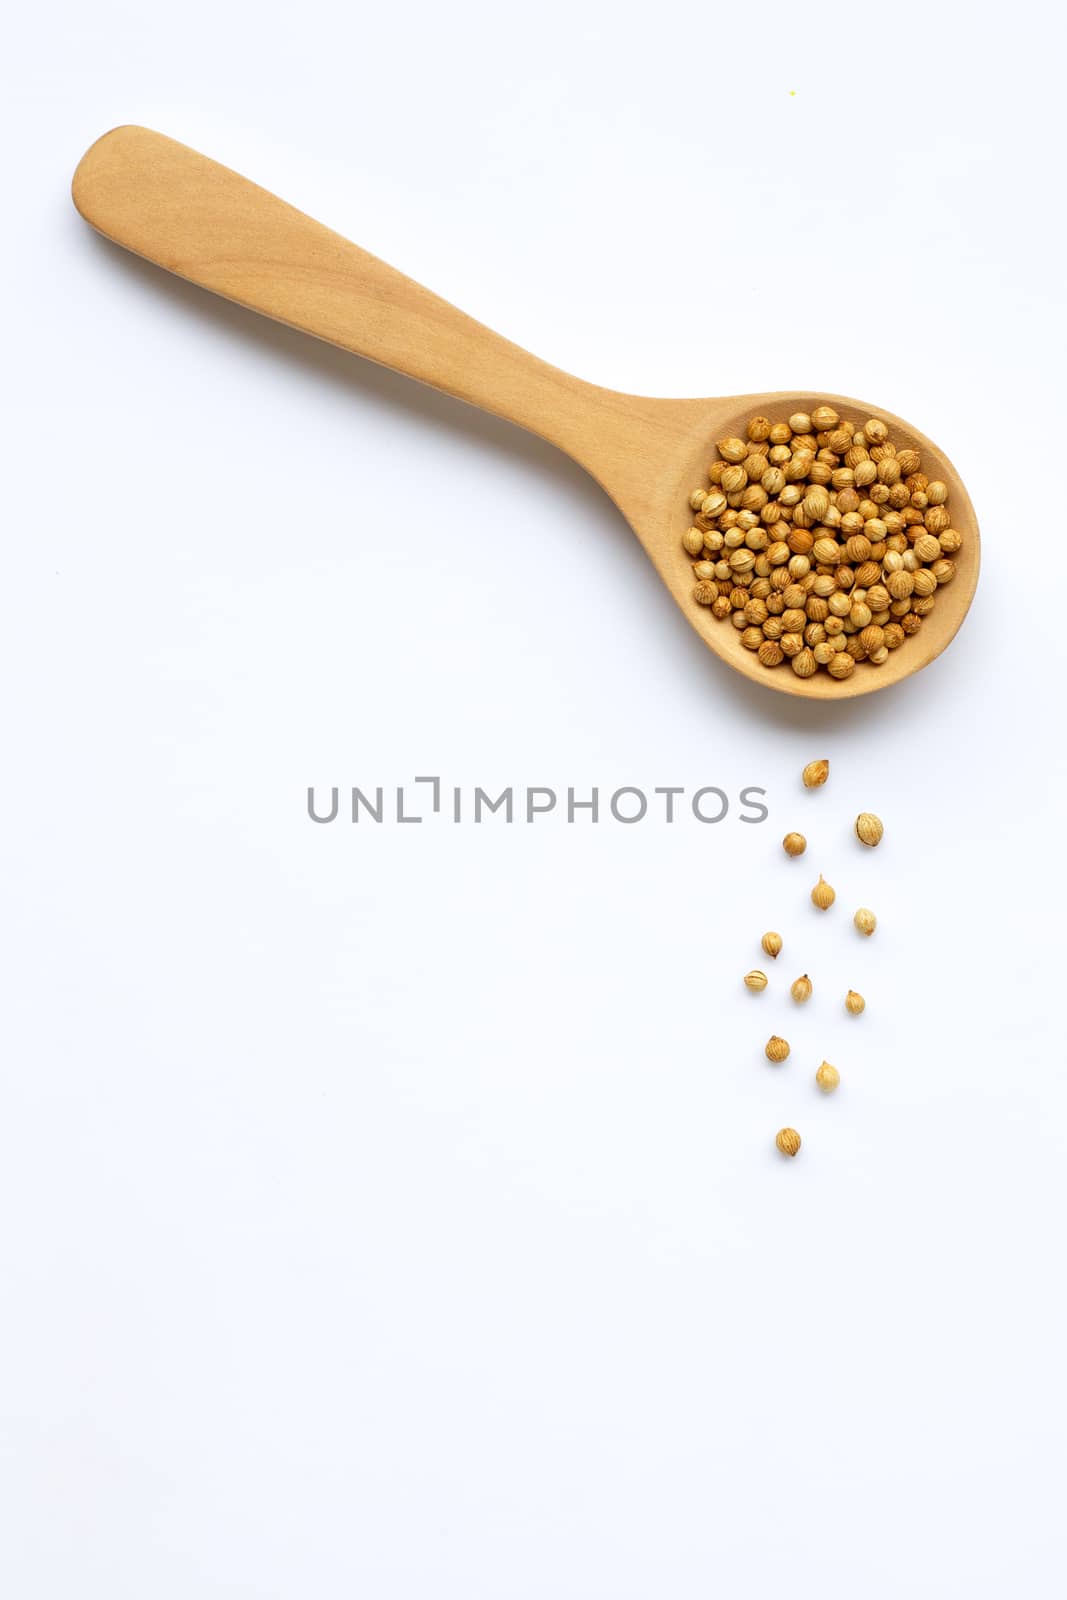 Coriander seeds in the wooden spoon on white by Bowonpat